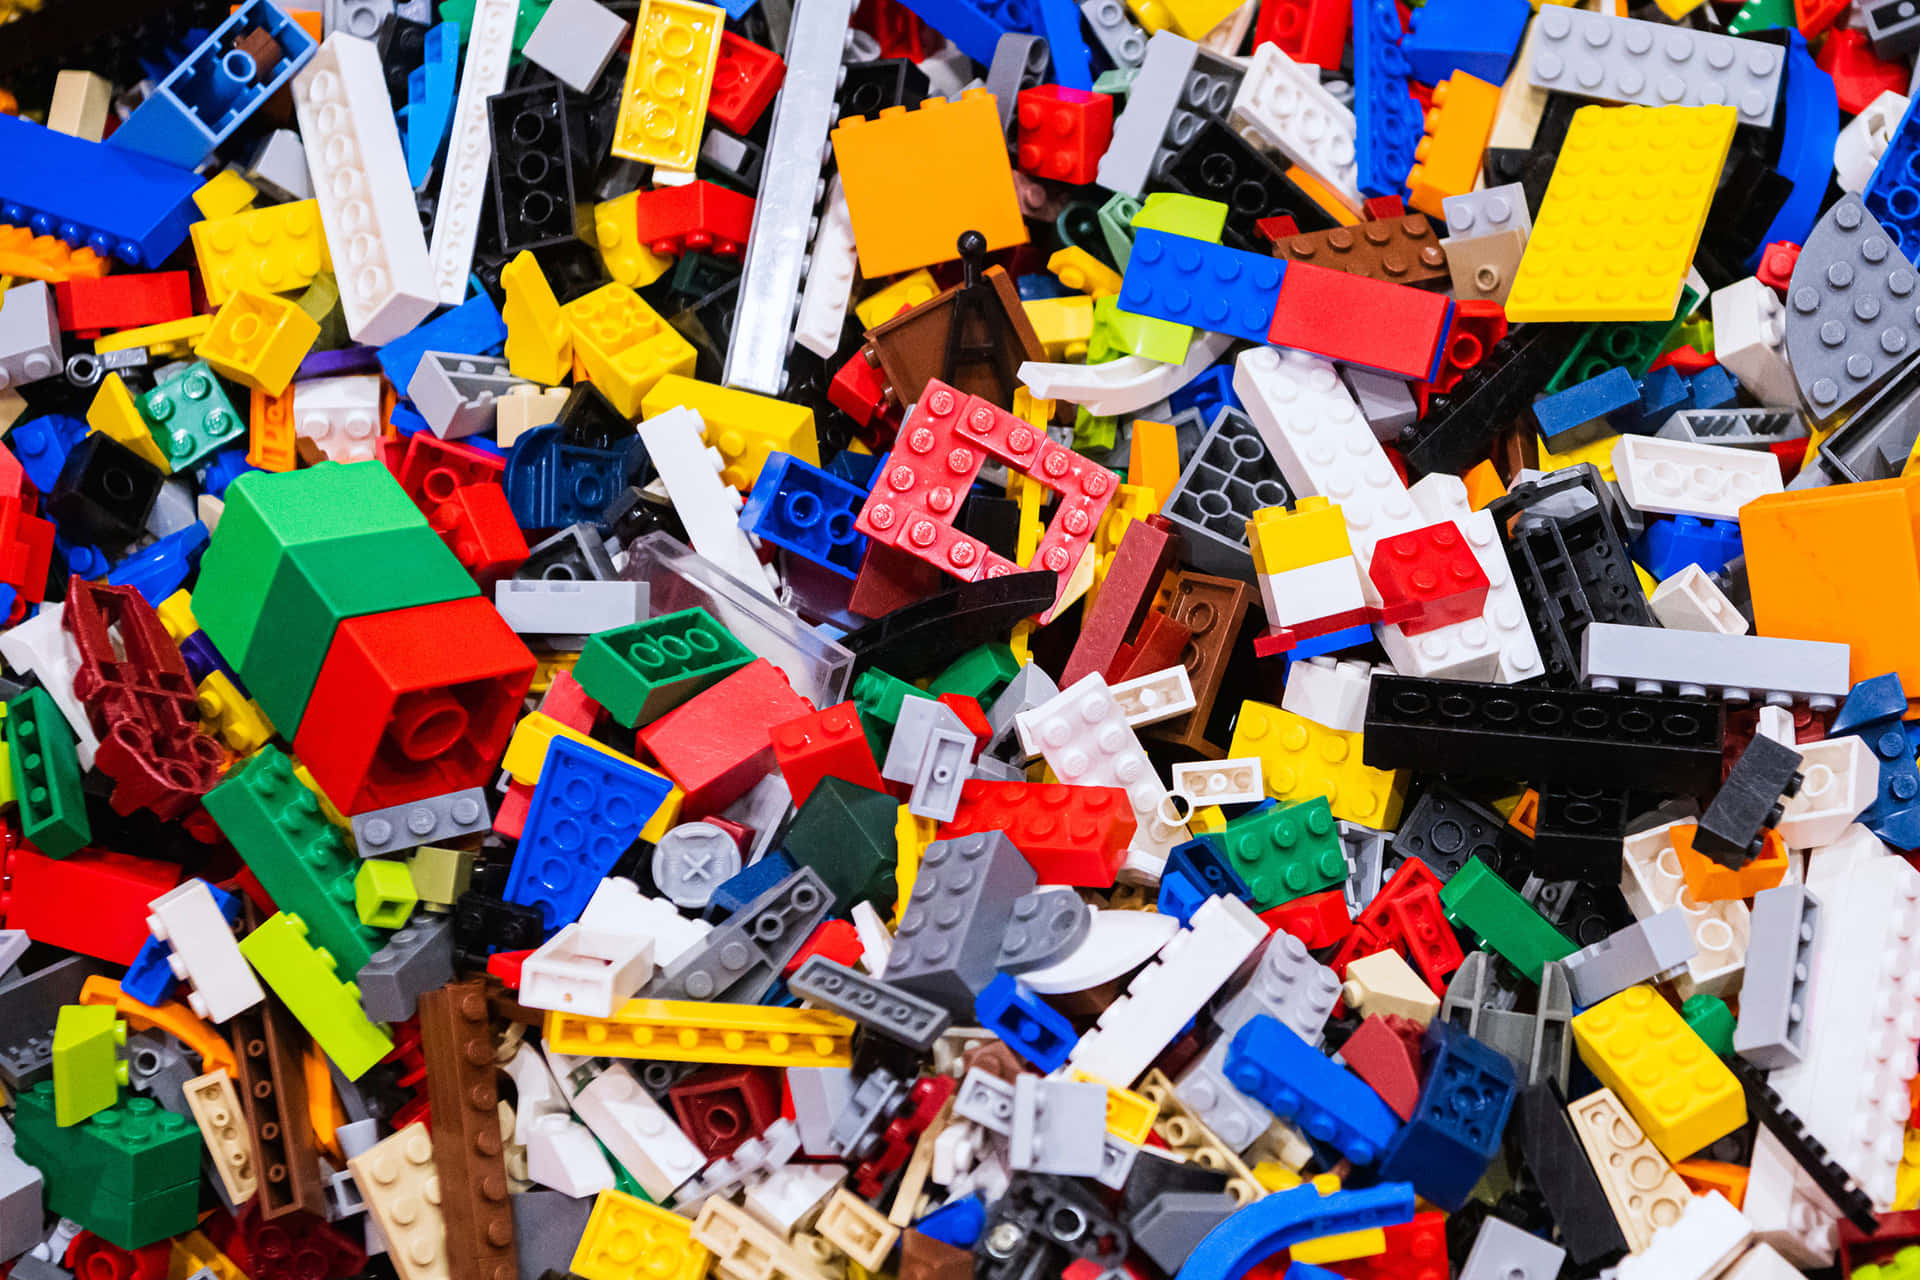 Download Lego Pictures | Wallpapers.com